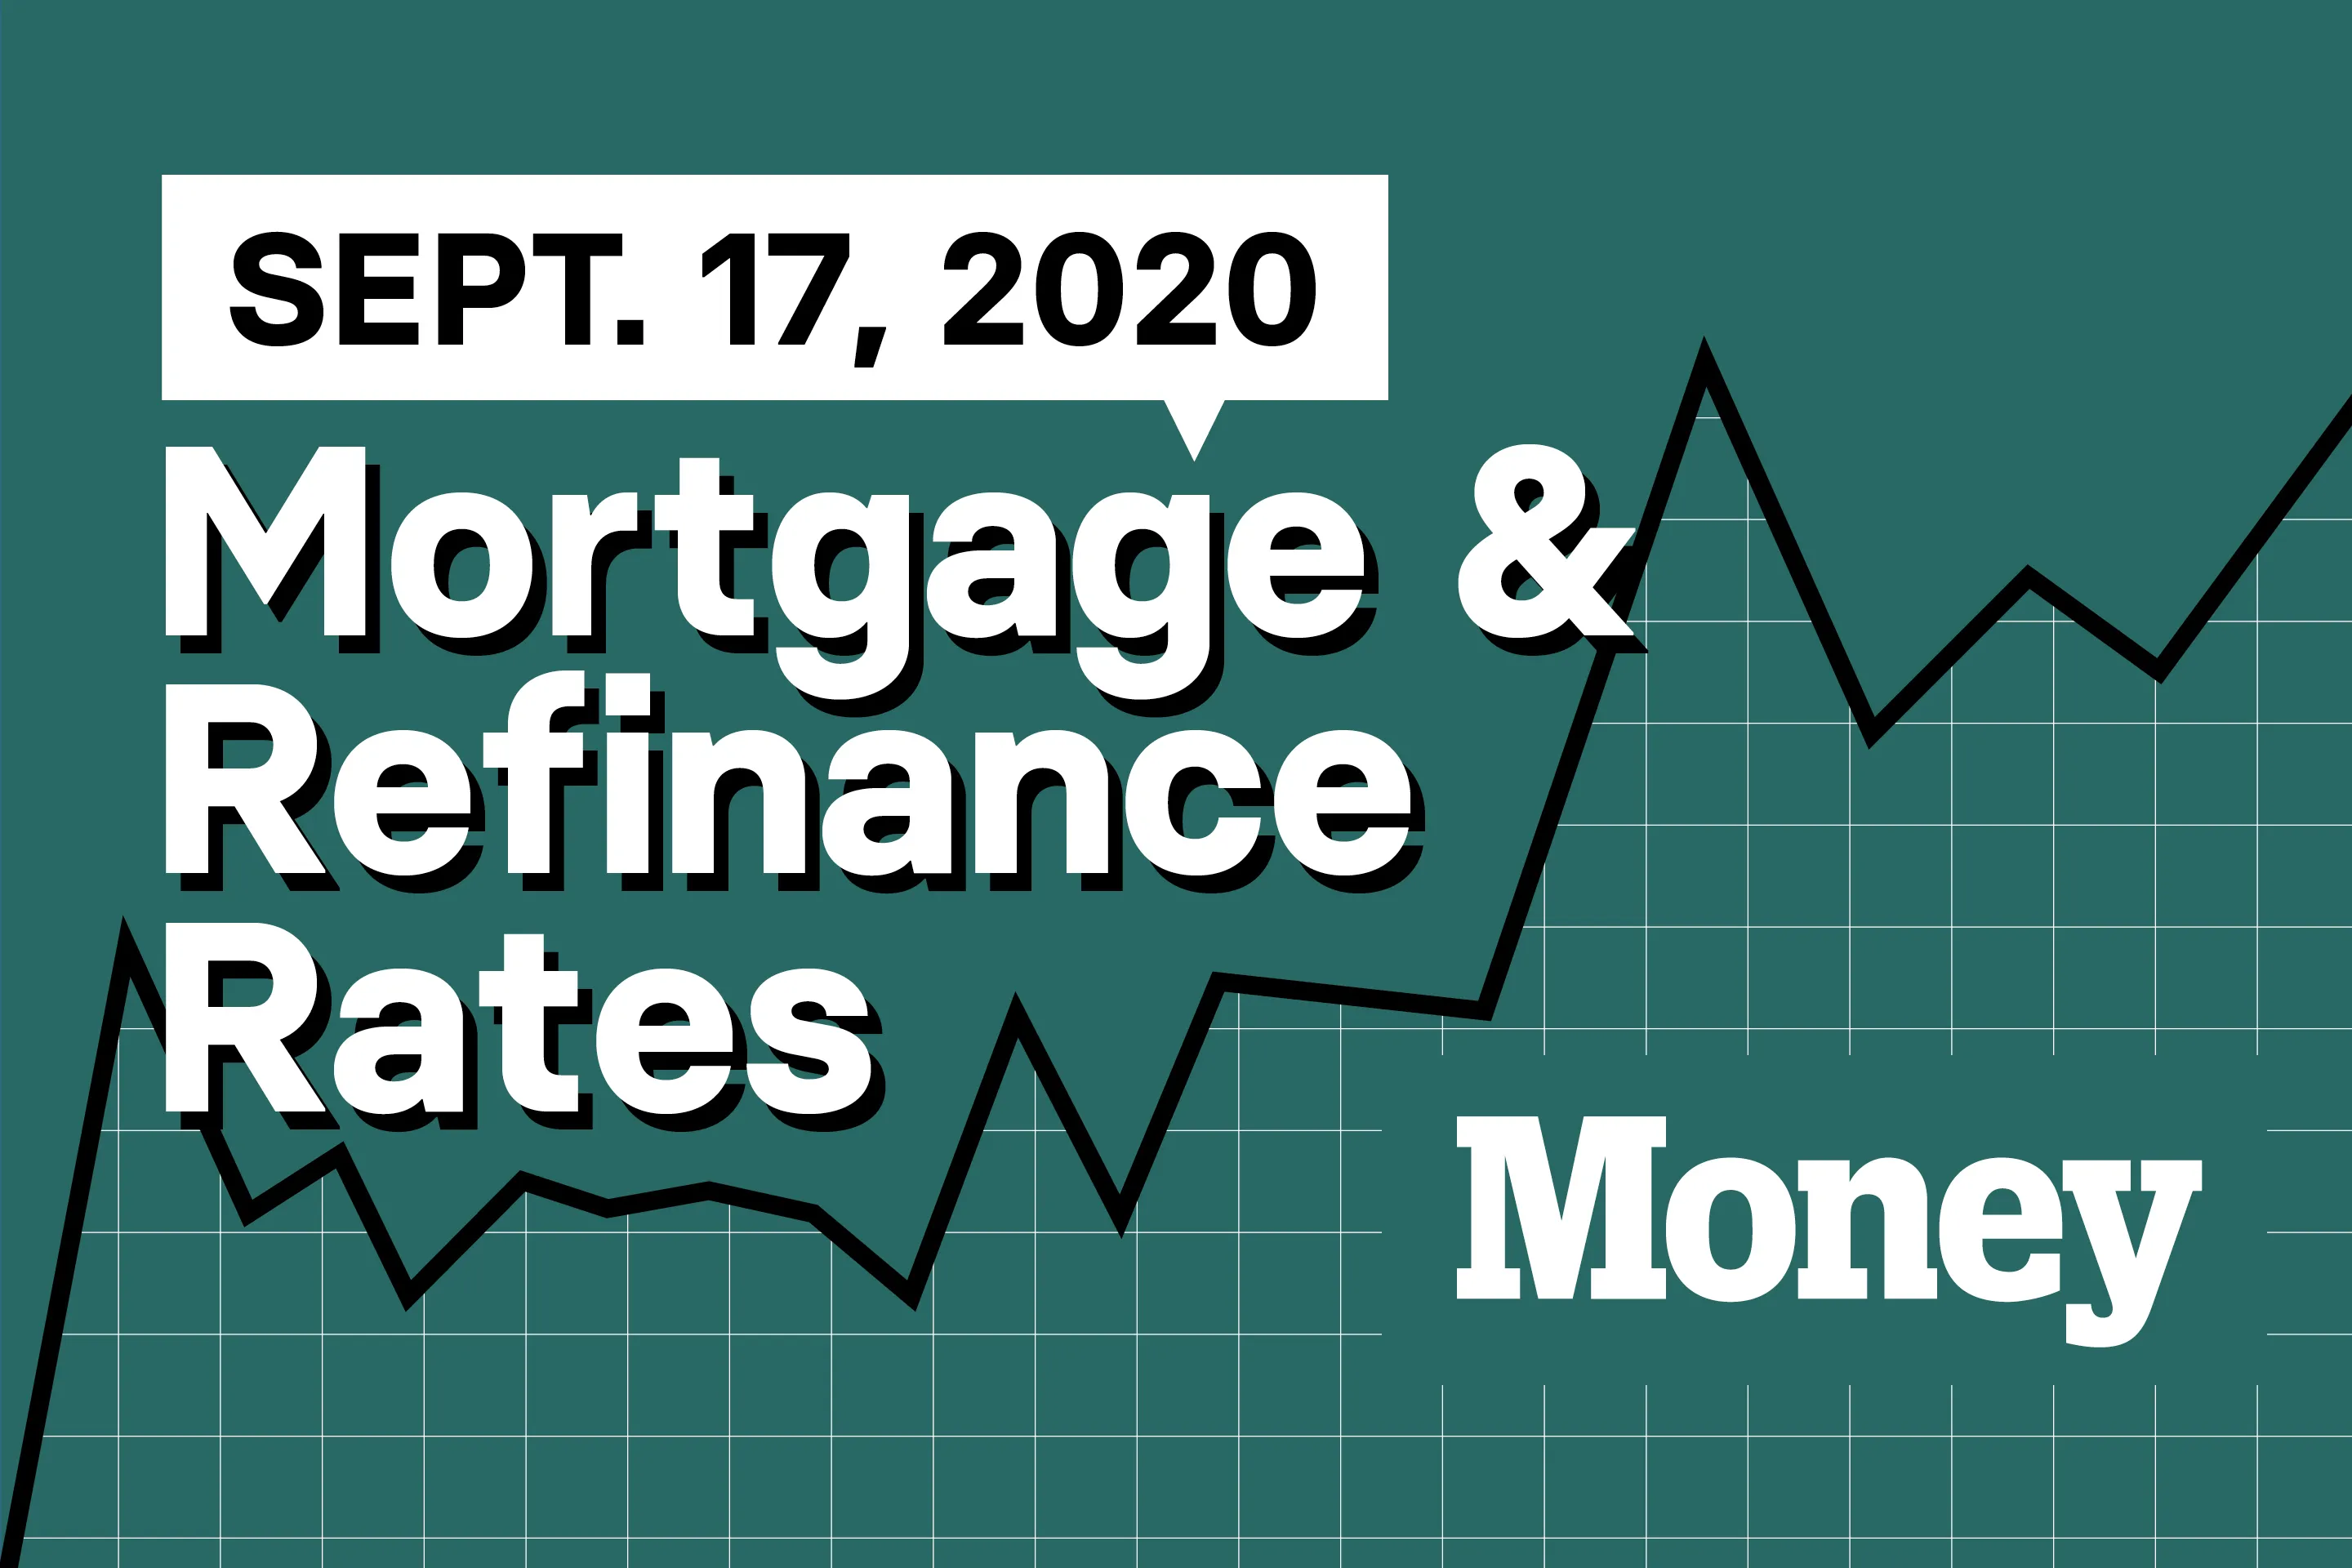 Here Are Today's Best Mortgage & Refinance Rates for September 17, 2020